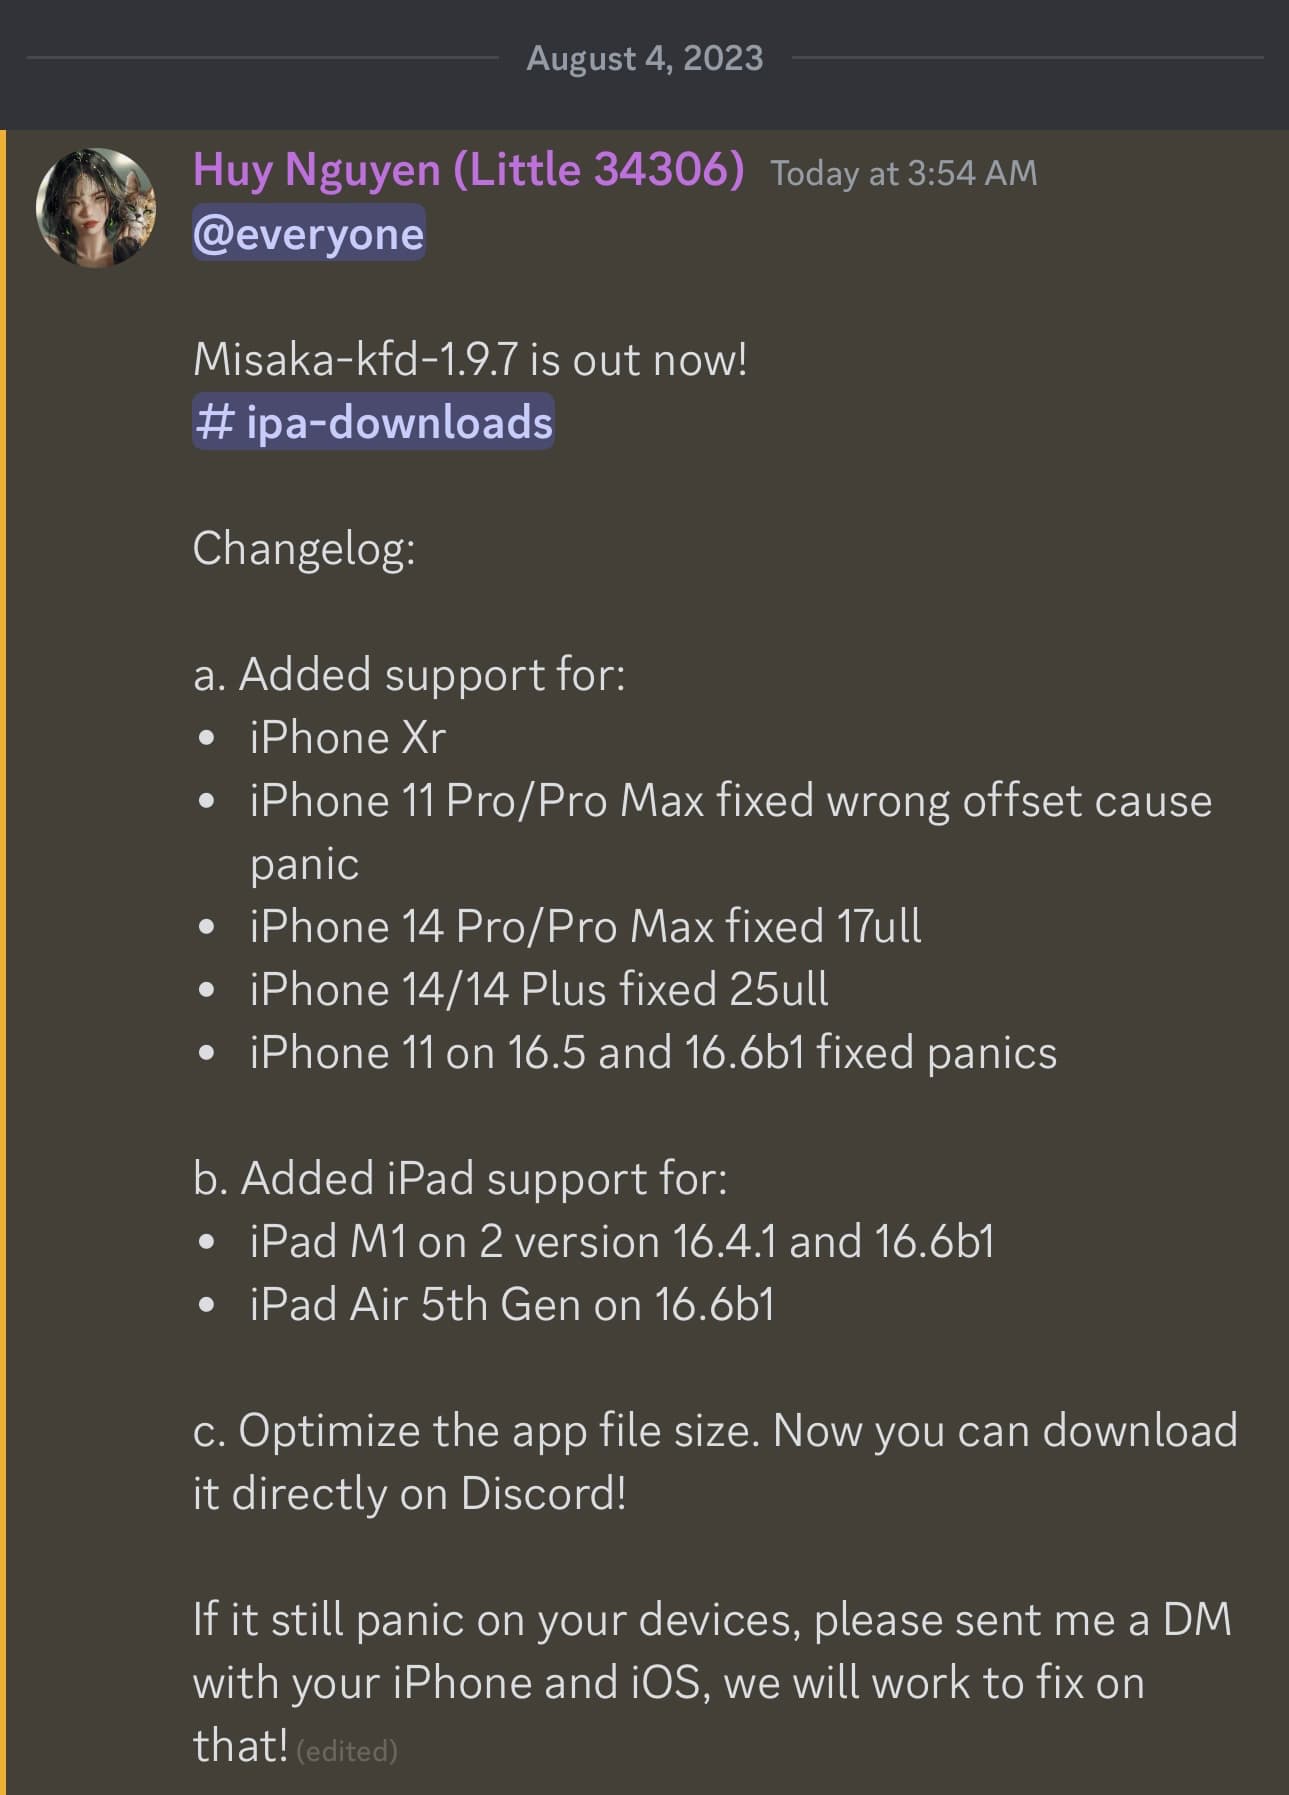 Misaka v1.9.7 beta brings support for even more devices, makes app easier to download